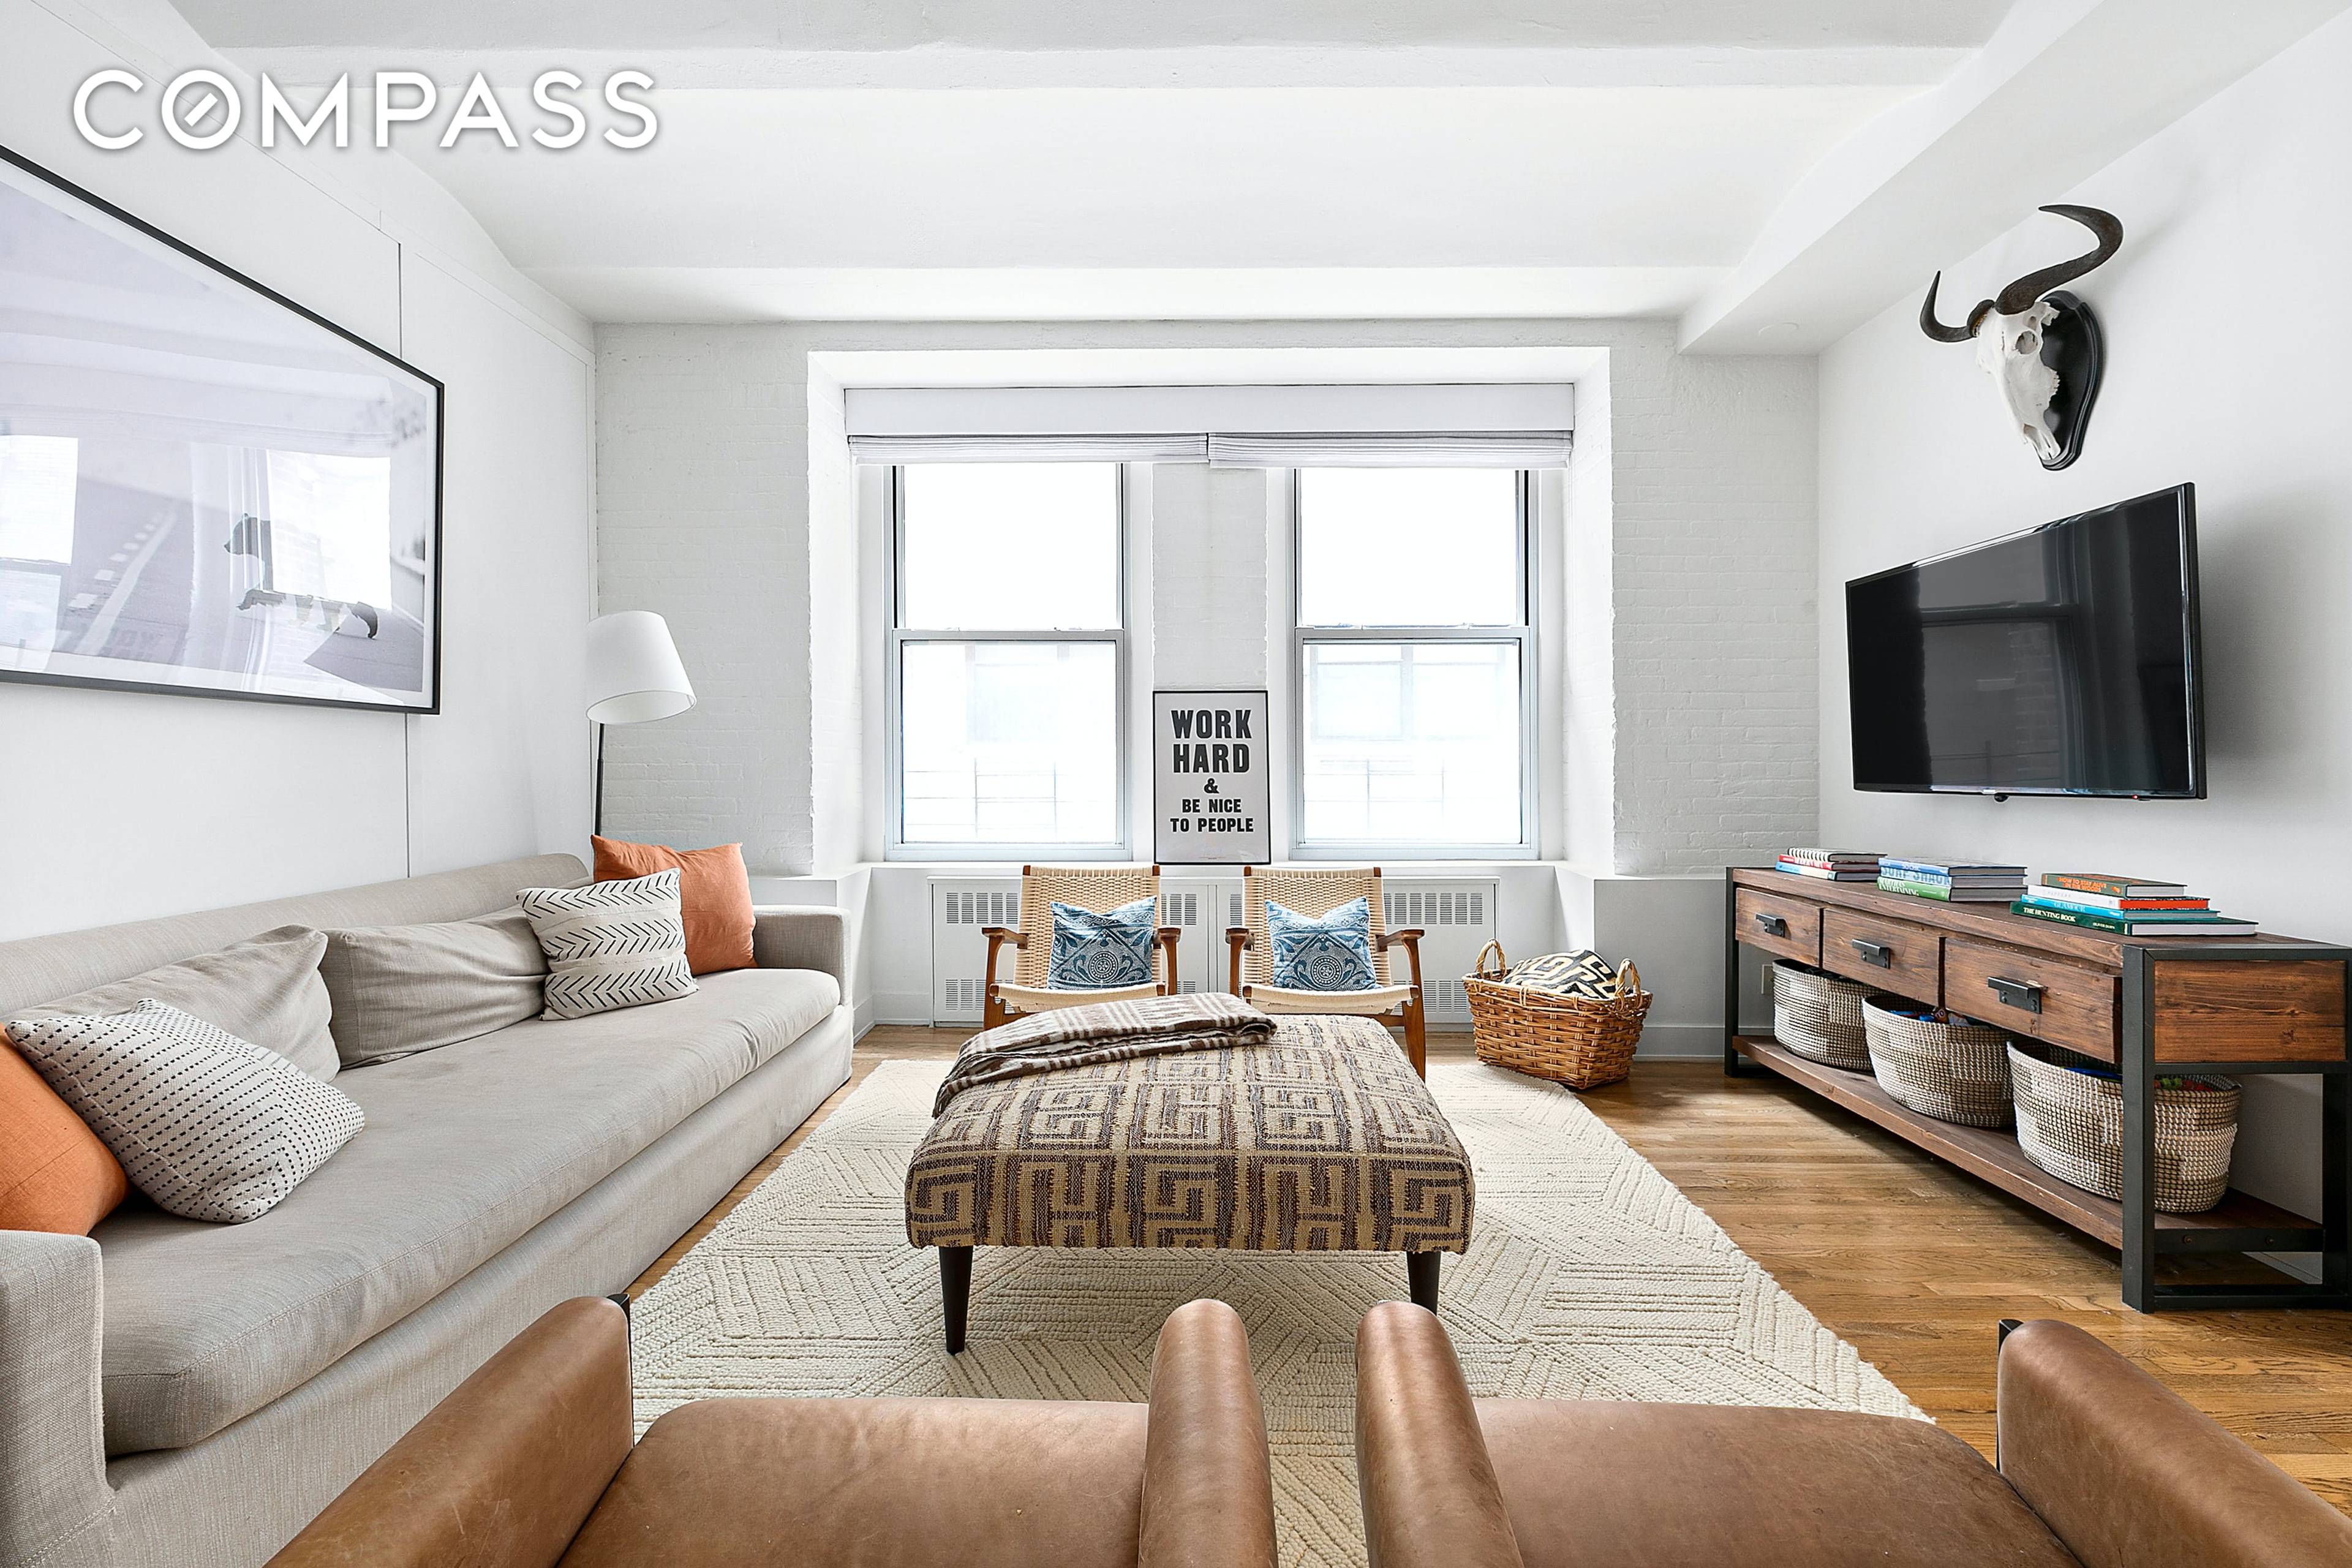 Tribeca loft perfection abounds in this MINT renovated classic loft, located on a prized block in prime Tribeca.